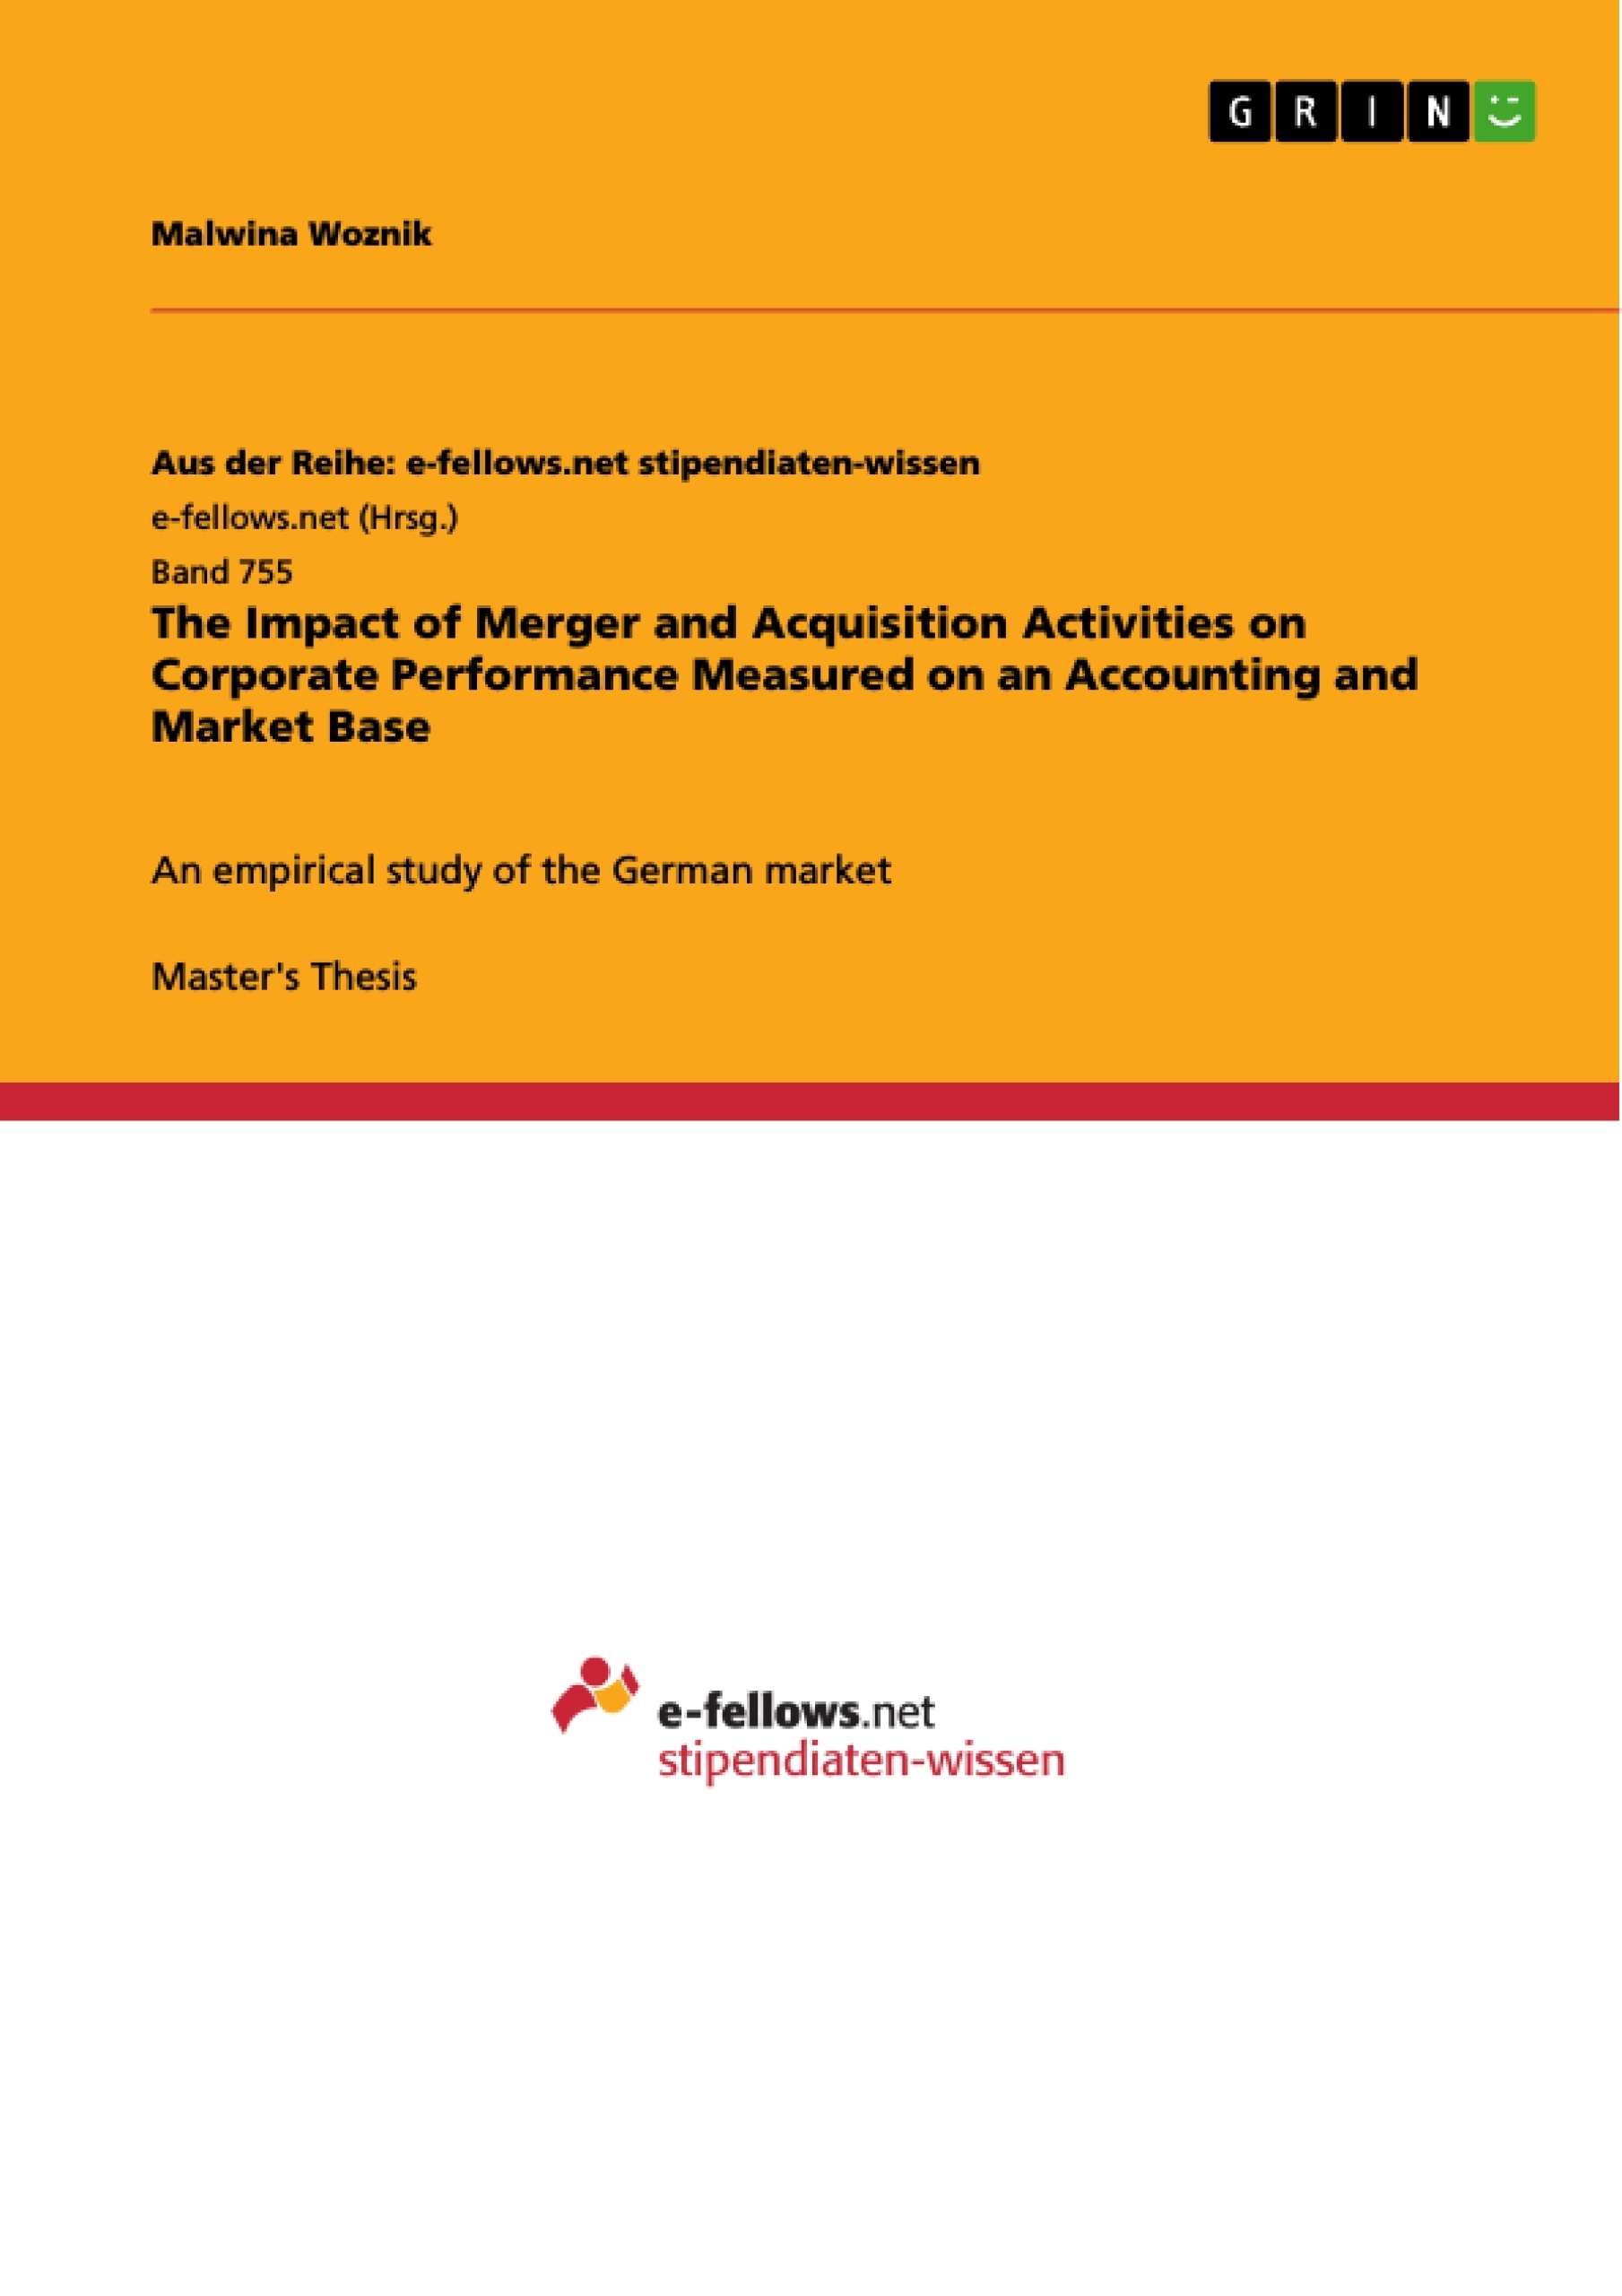 Title: The Impact of Merger and Acquisition Activities on Corporate Performance Measured on an Accounting and Market Base